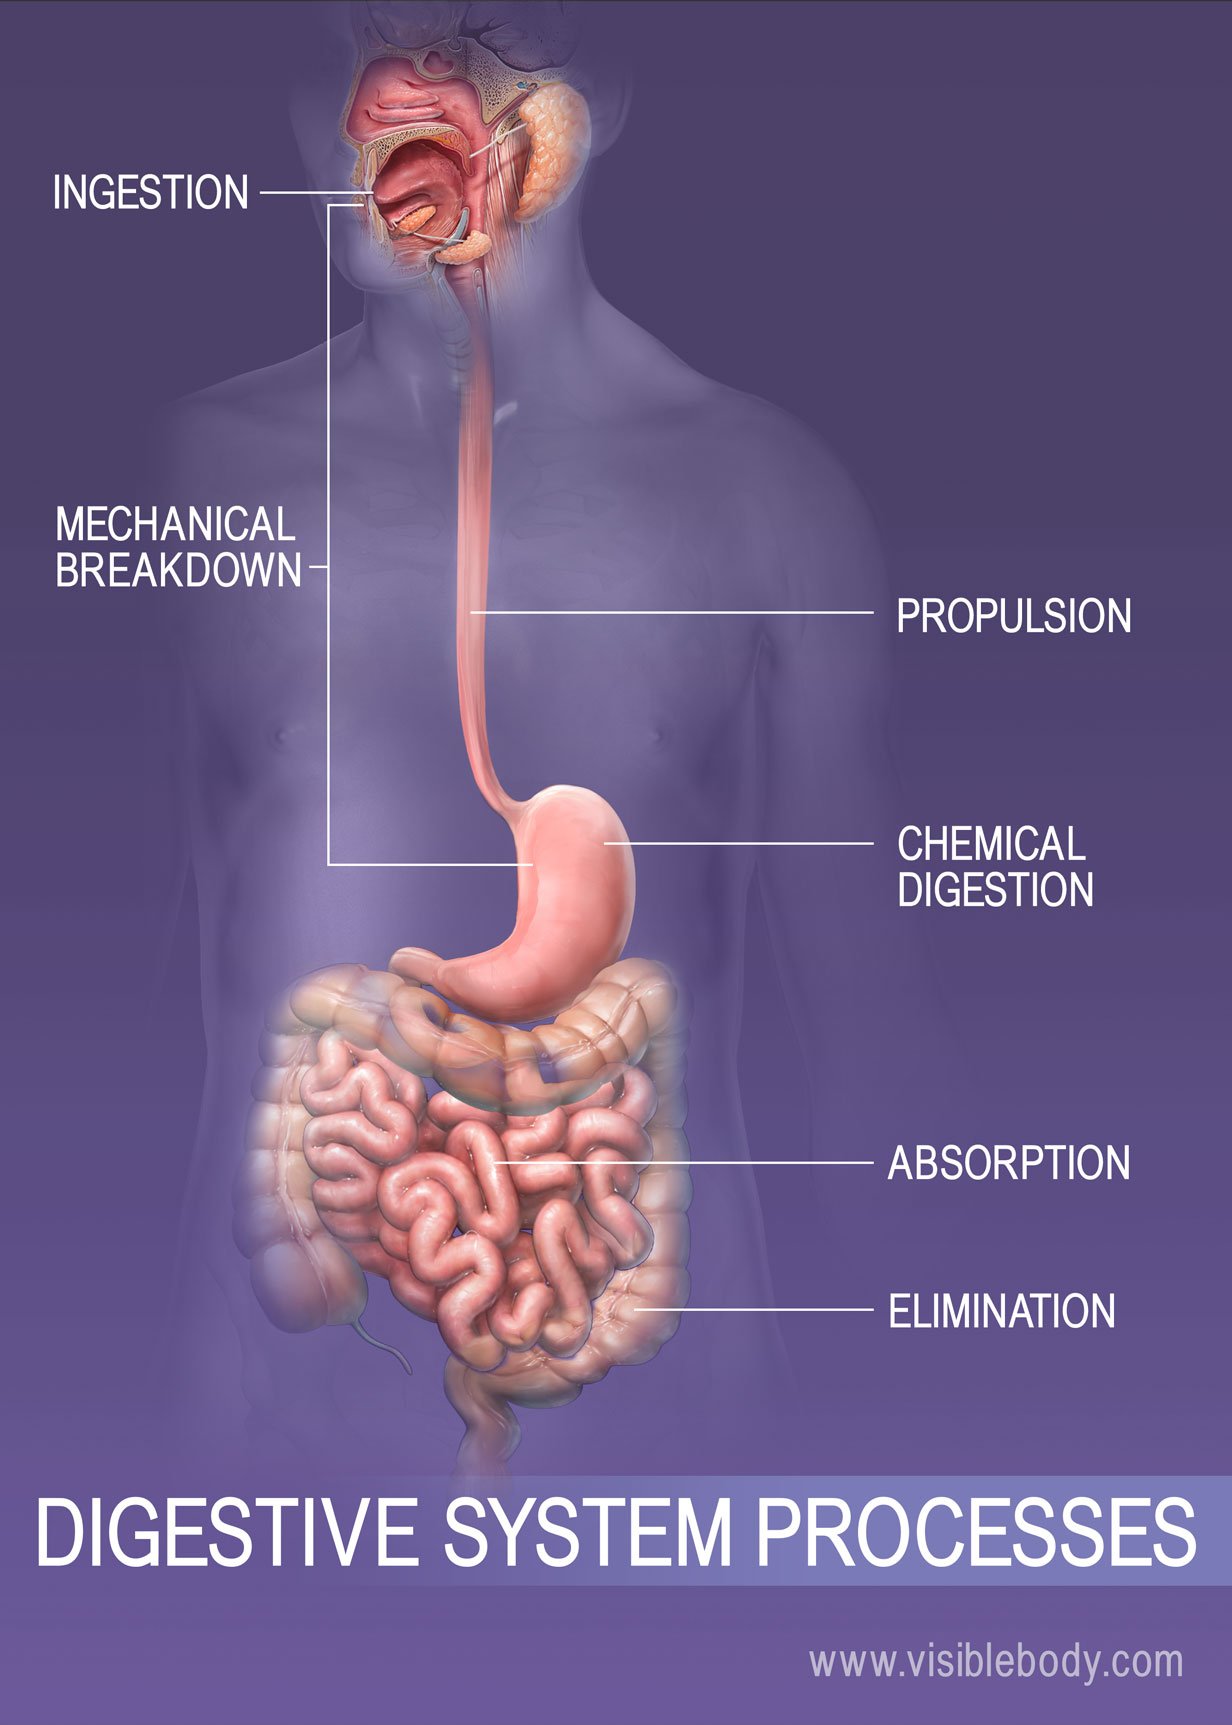 10 Facts About The Digestive System 3632